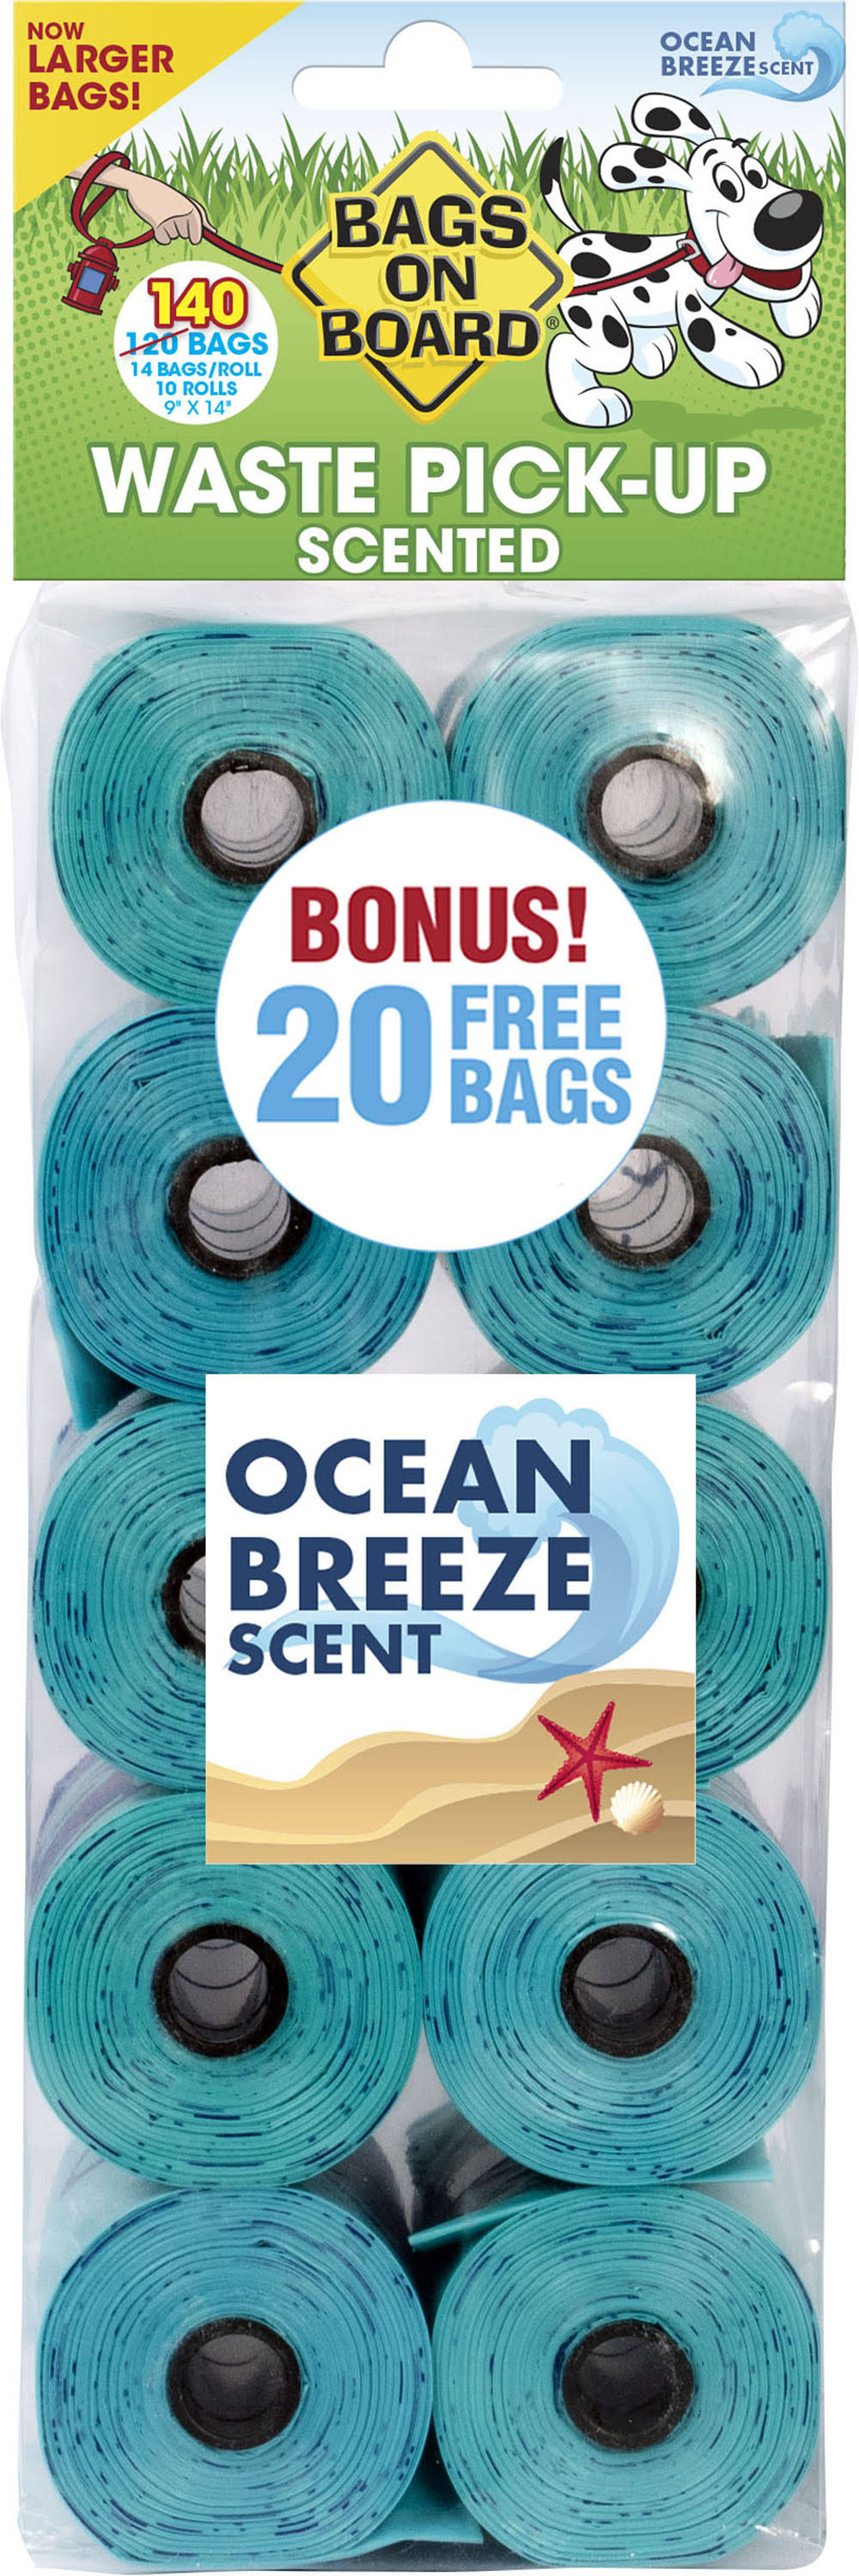 Bags on Board Waste Pickup Refill Bags - Ocean Breeze Scented ,140 Bags